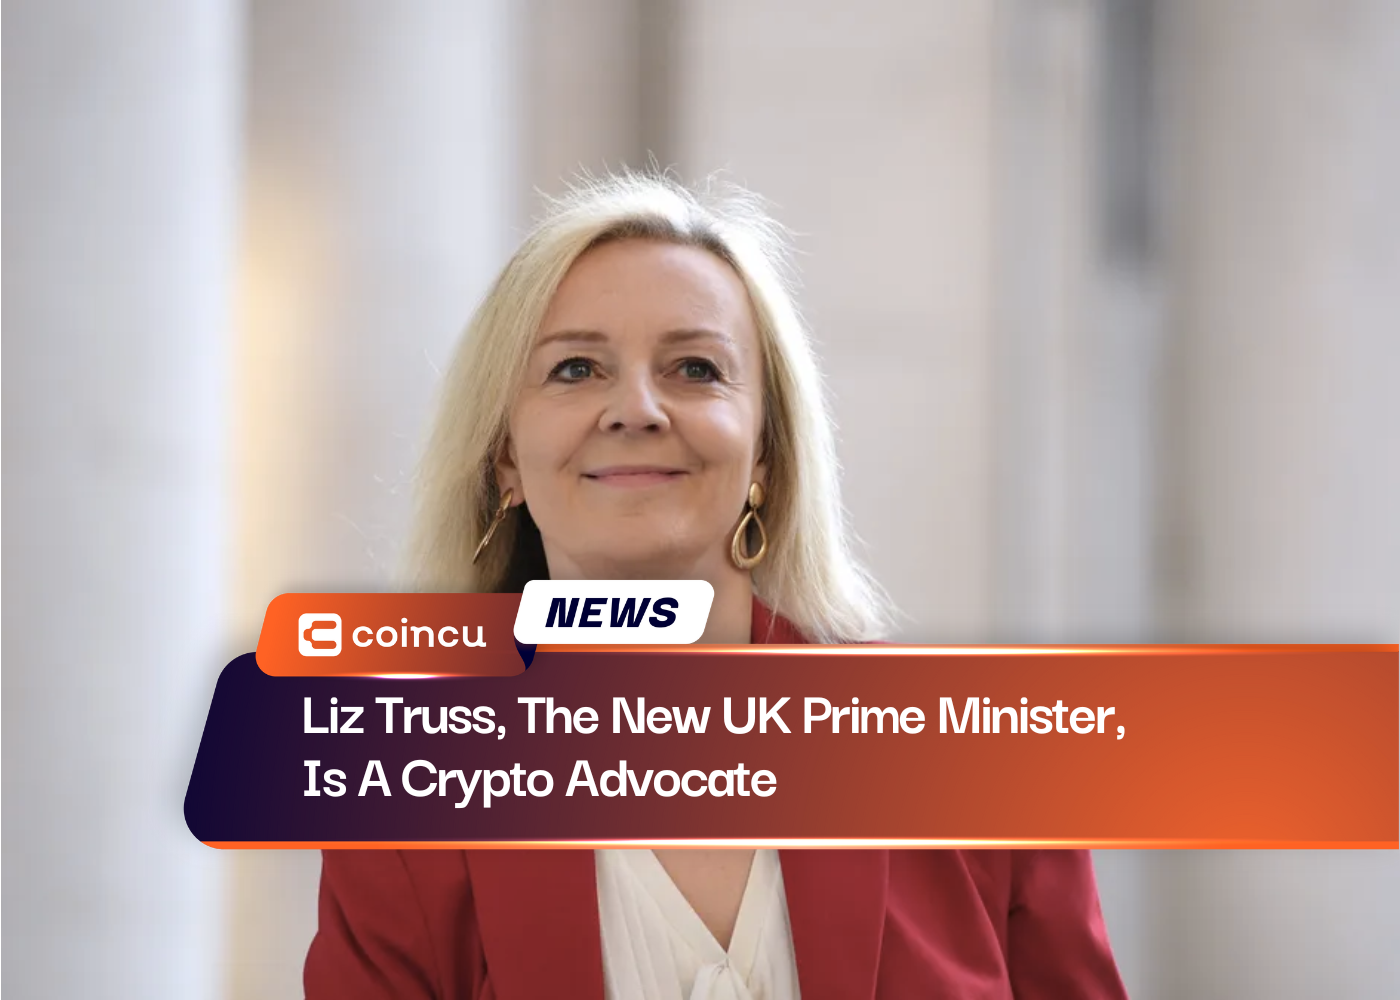 Liz Truss, The New UK Prime Minister, Is A Crypto Advocate